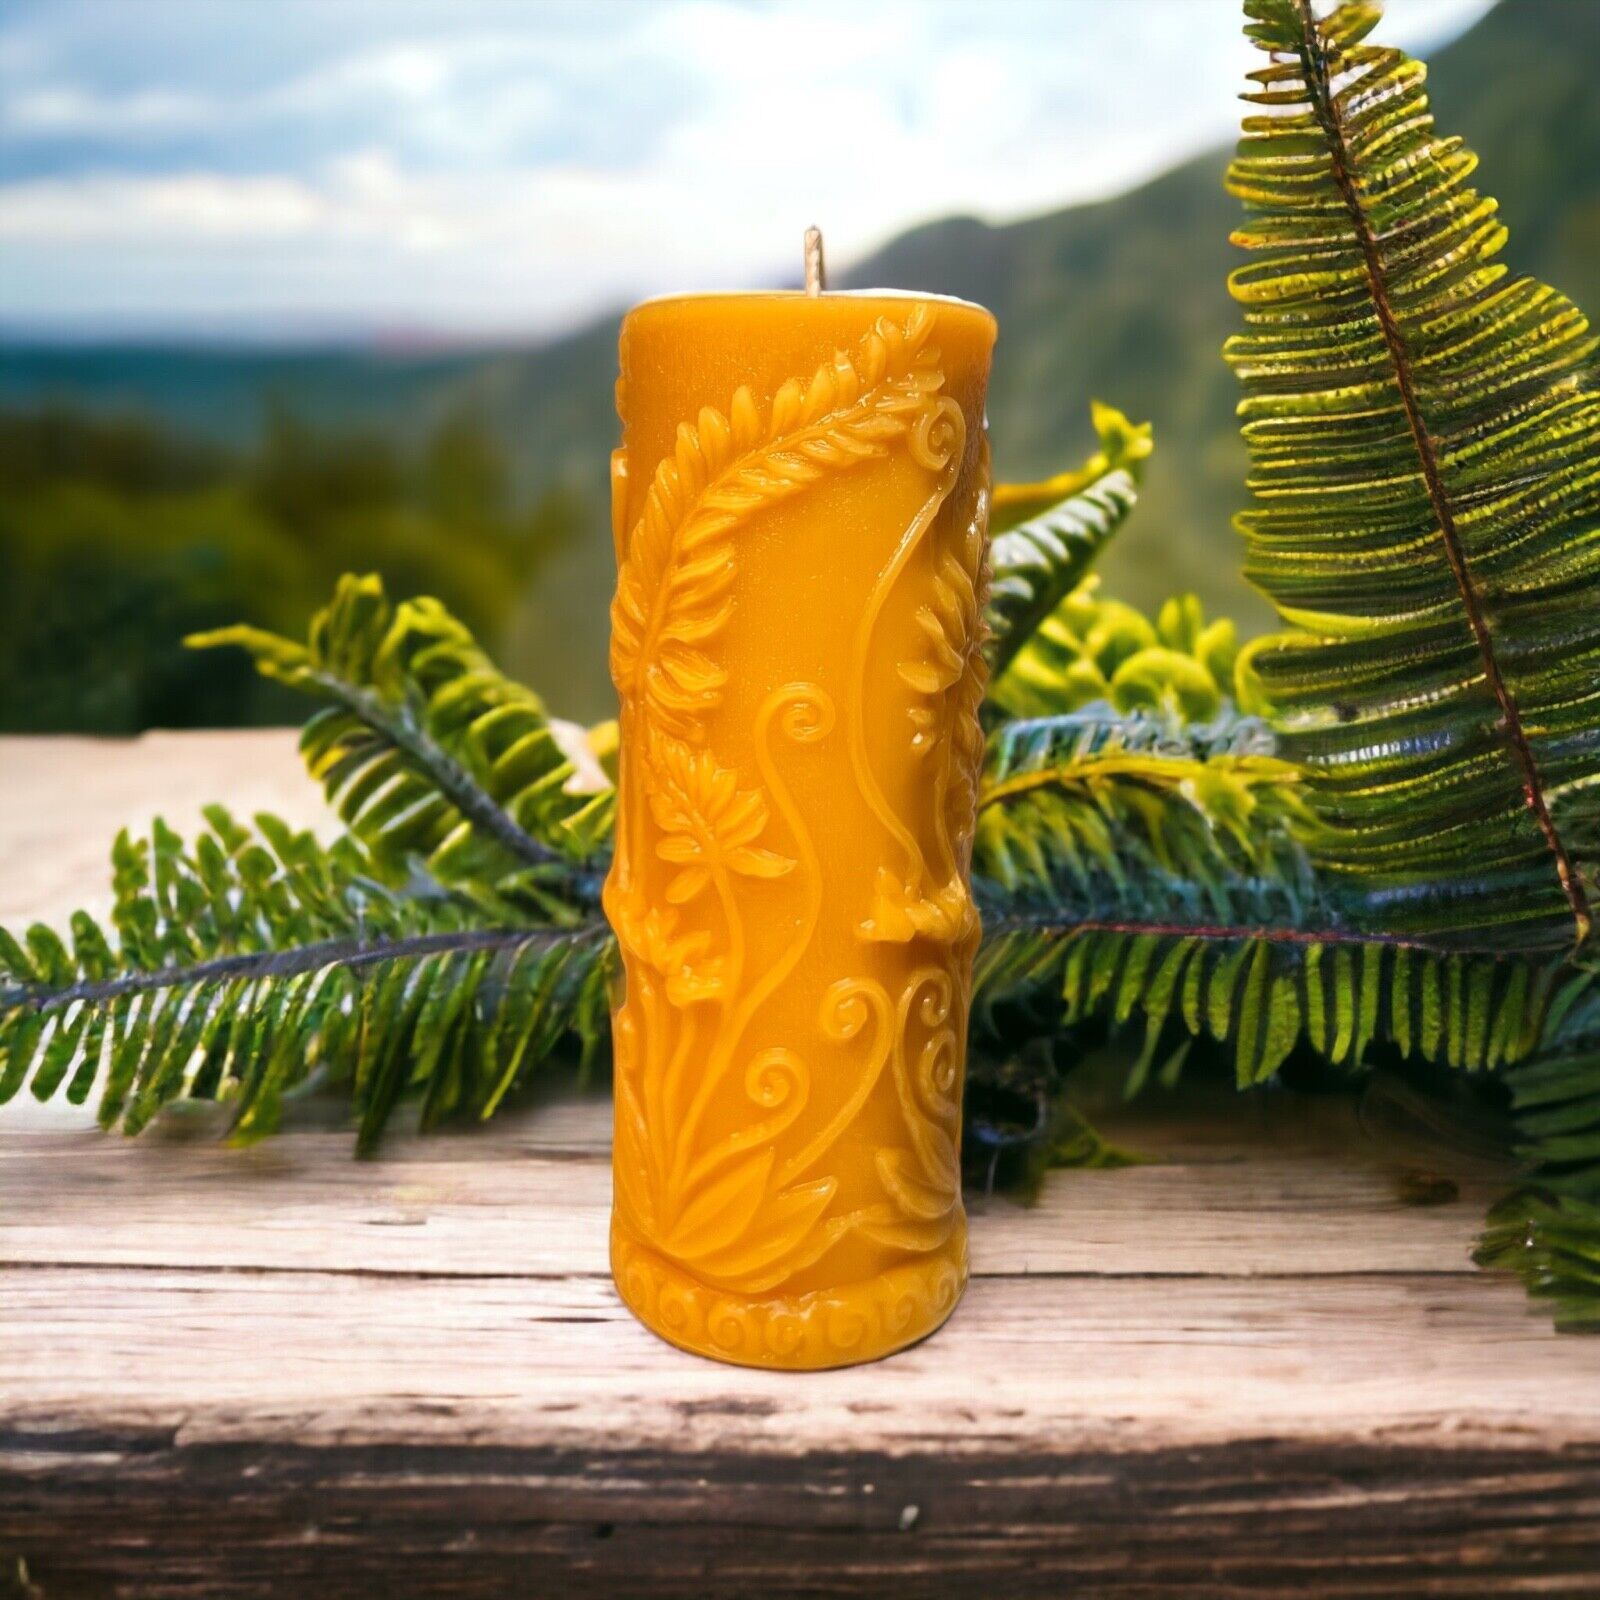 Rustic Fern Pure Beeswax Pillar candle, Large Size, Eco-Friendly, Handmade